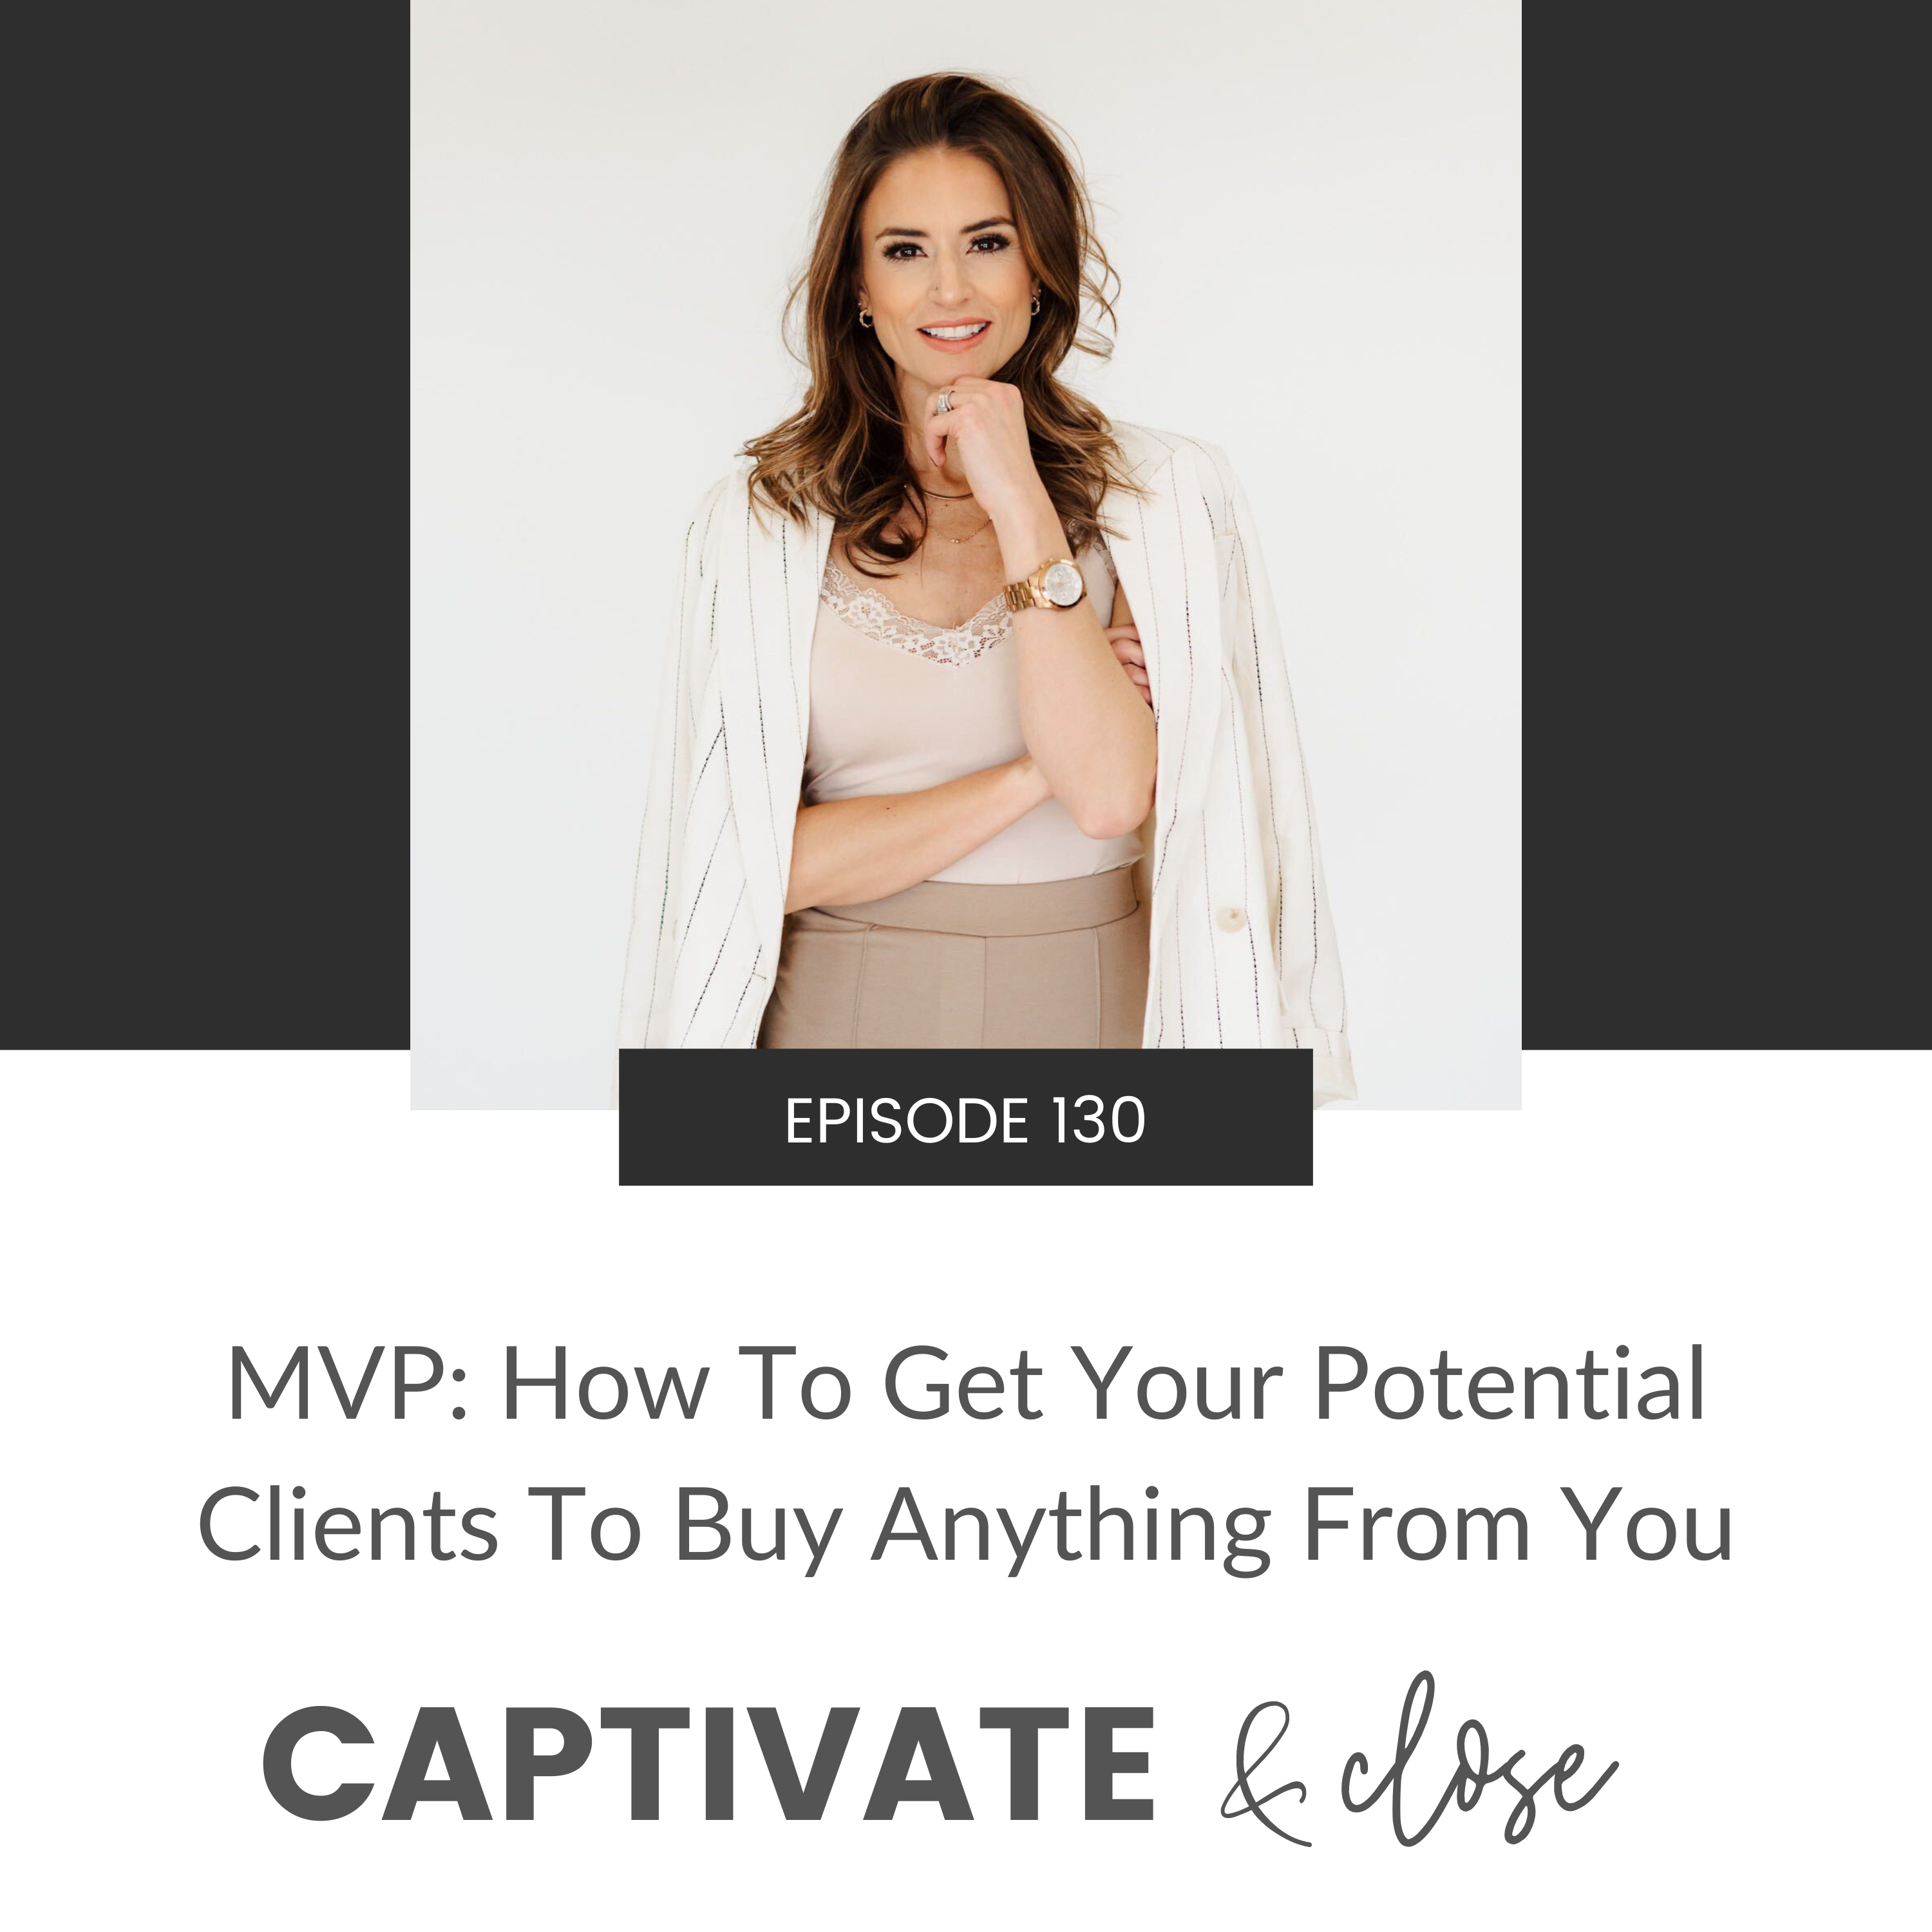 MVP: How To Get Your Potential Clients To Buy Anything From You